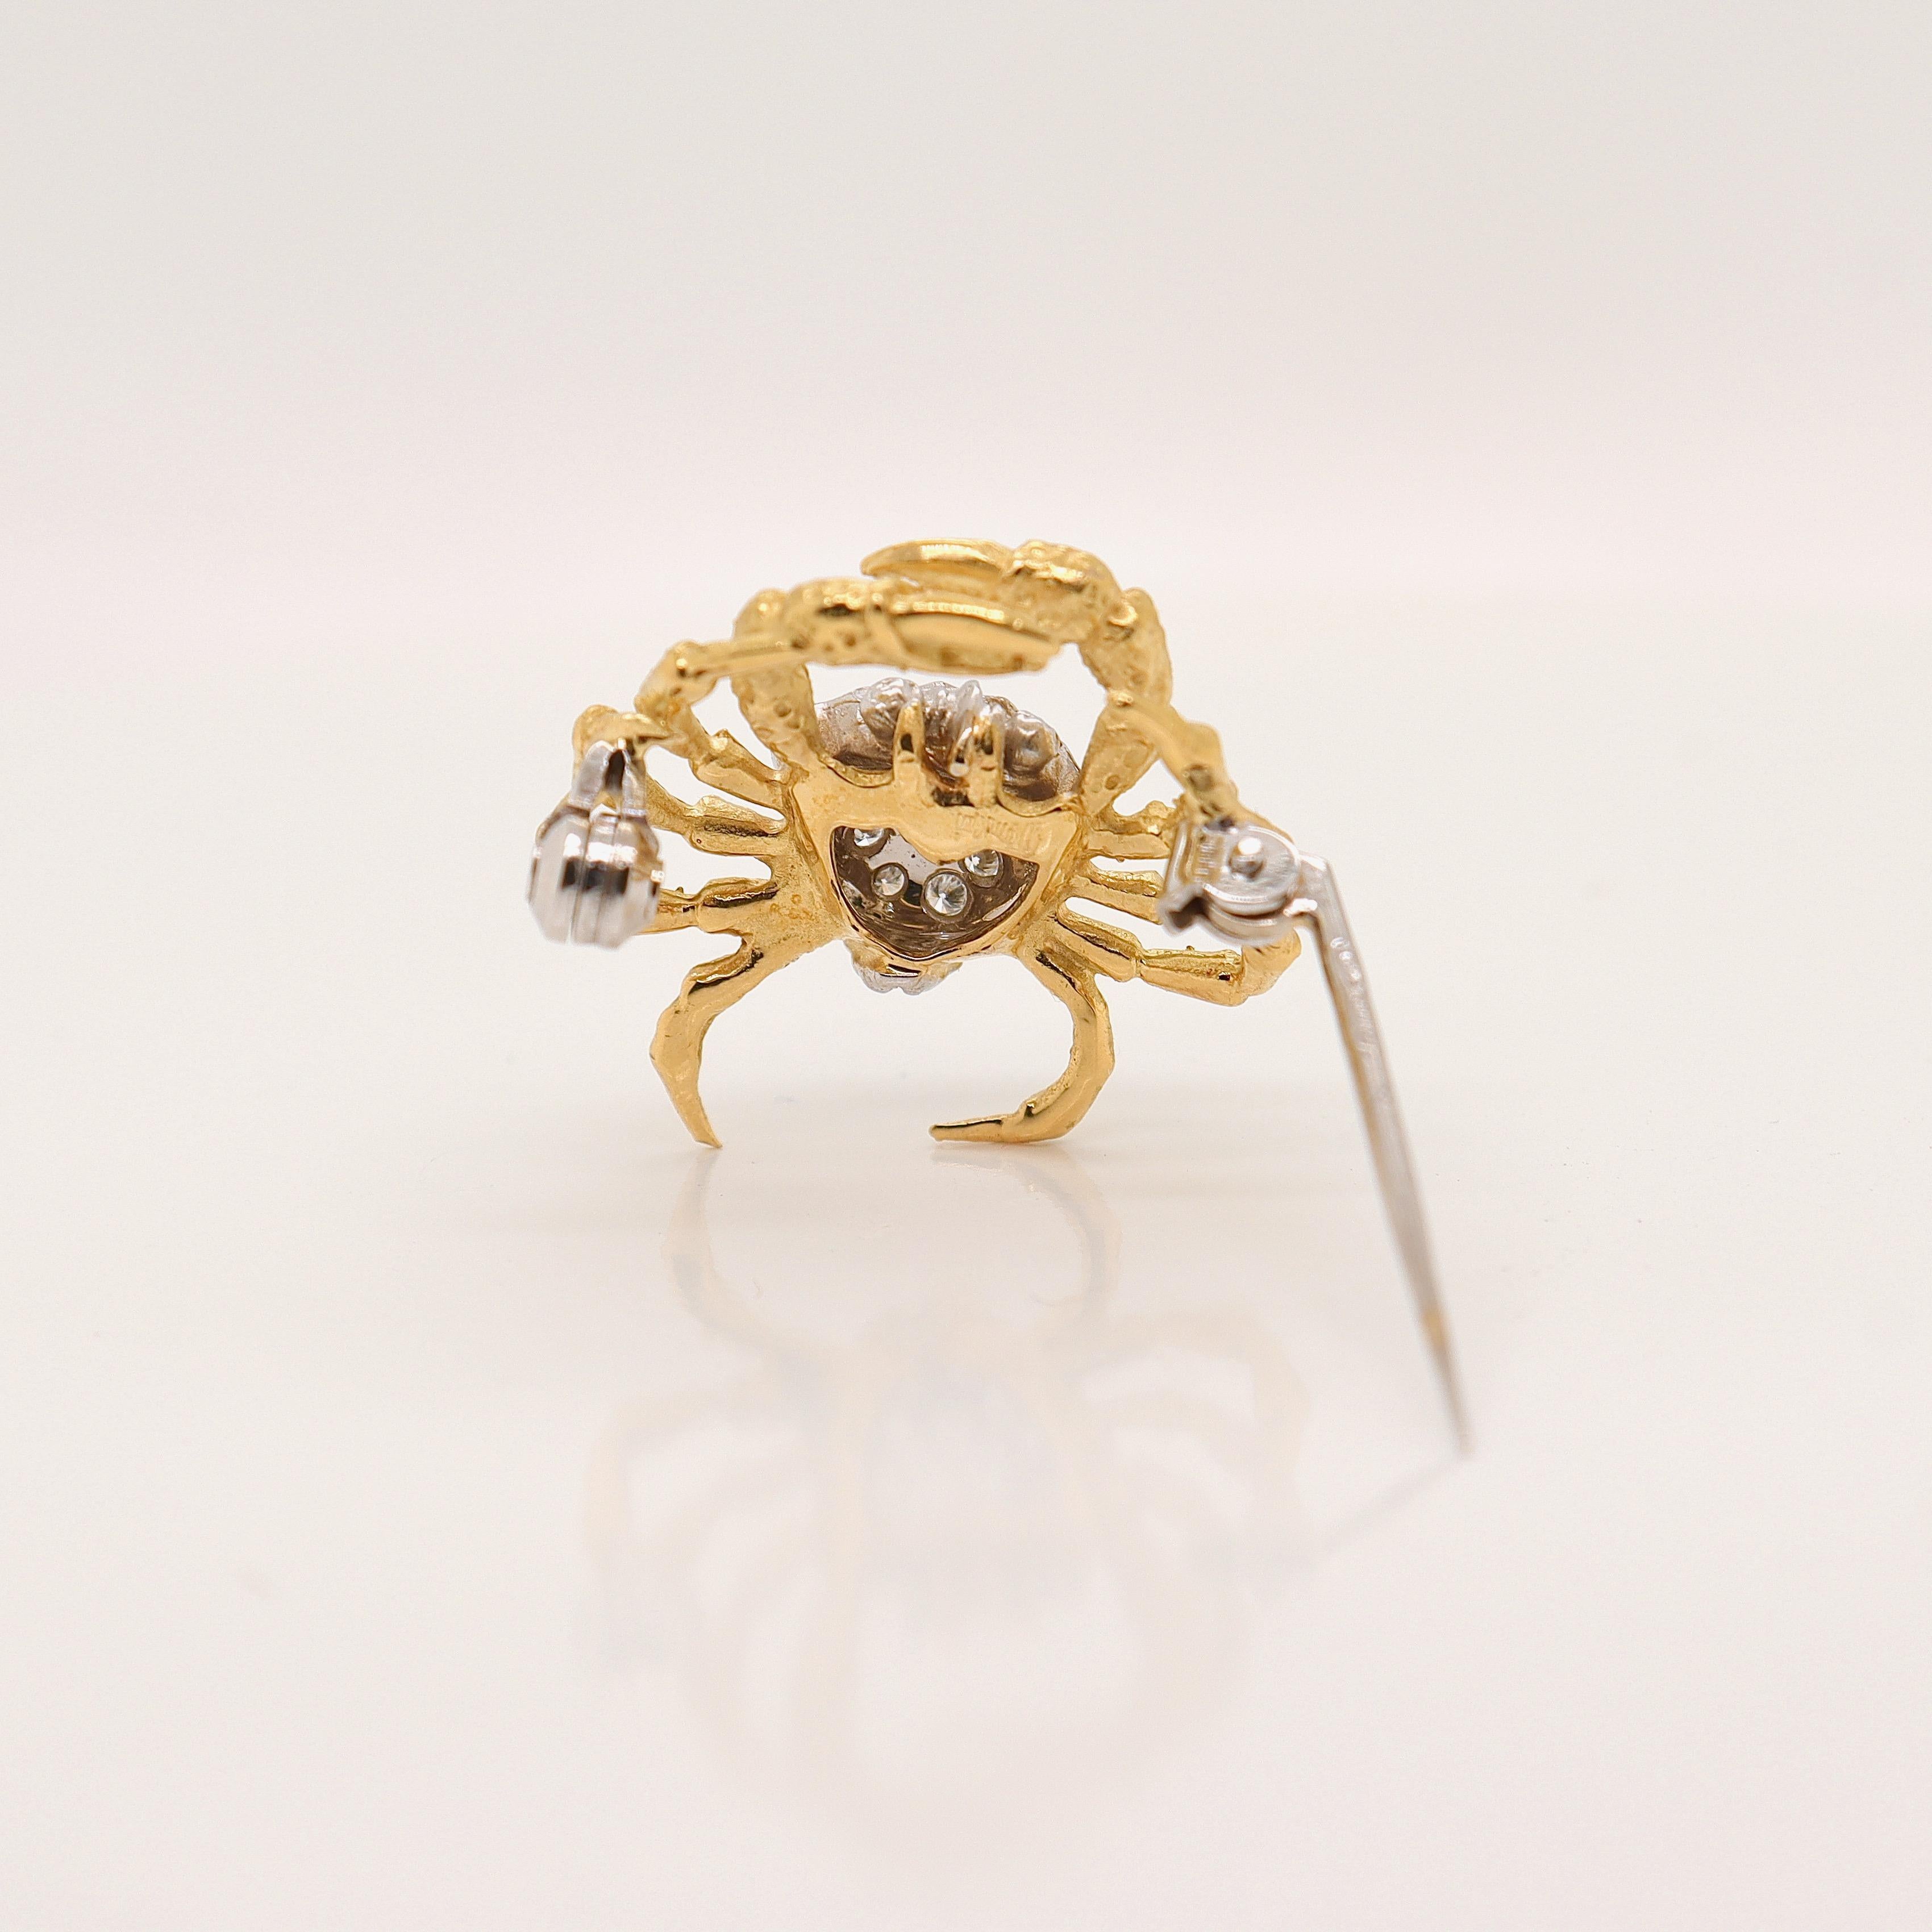 Signed Damiani 18k Gold & Diamond Crab Shaped Brooch or Pin  For Sale 1